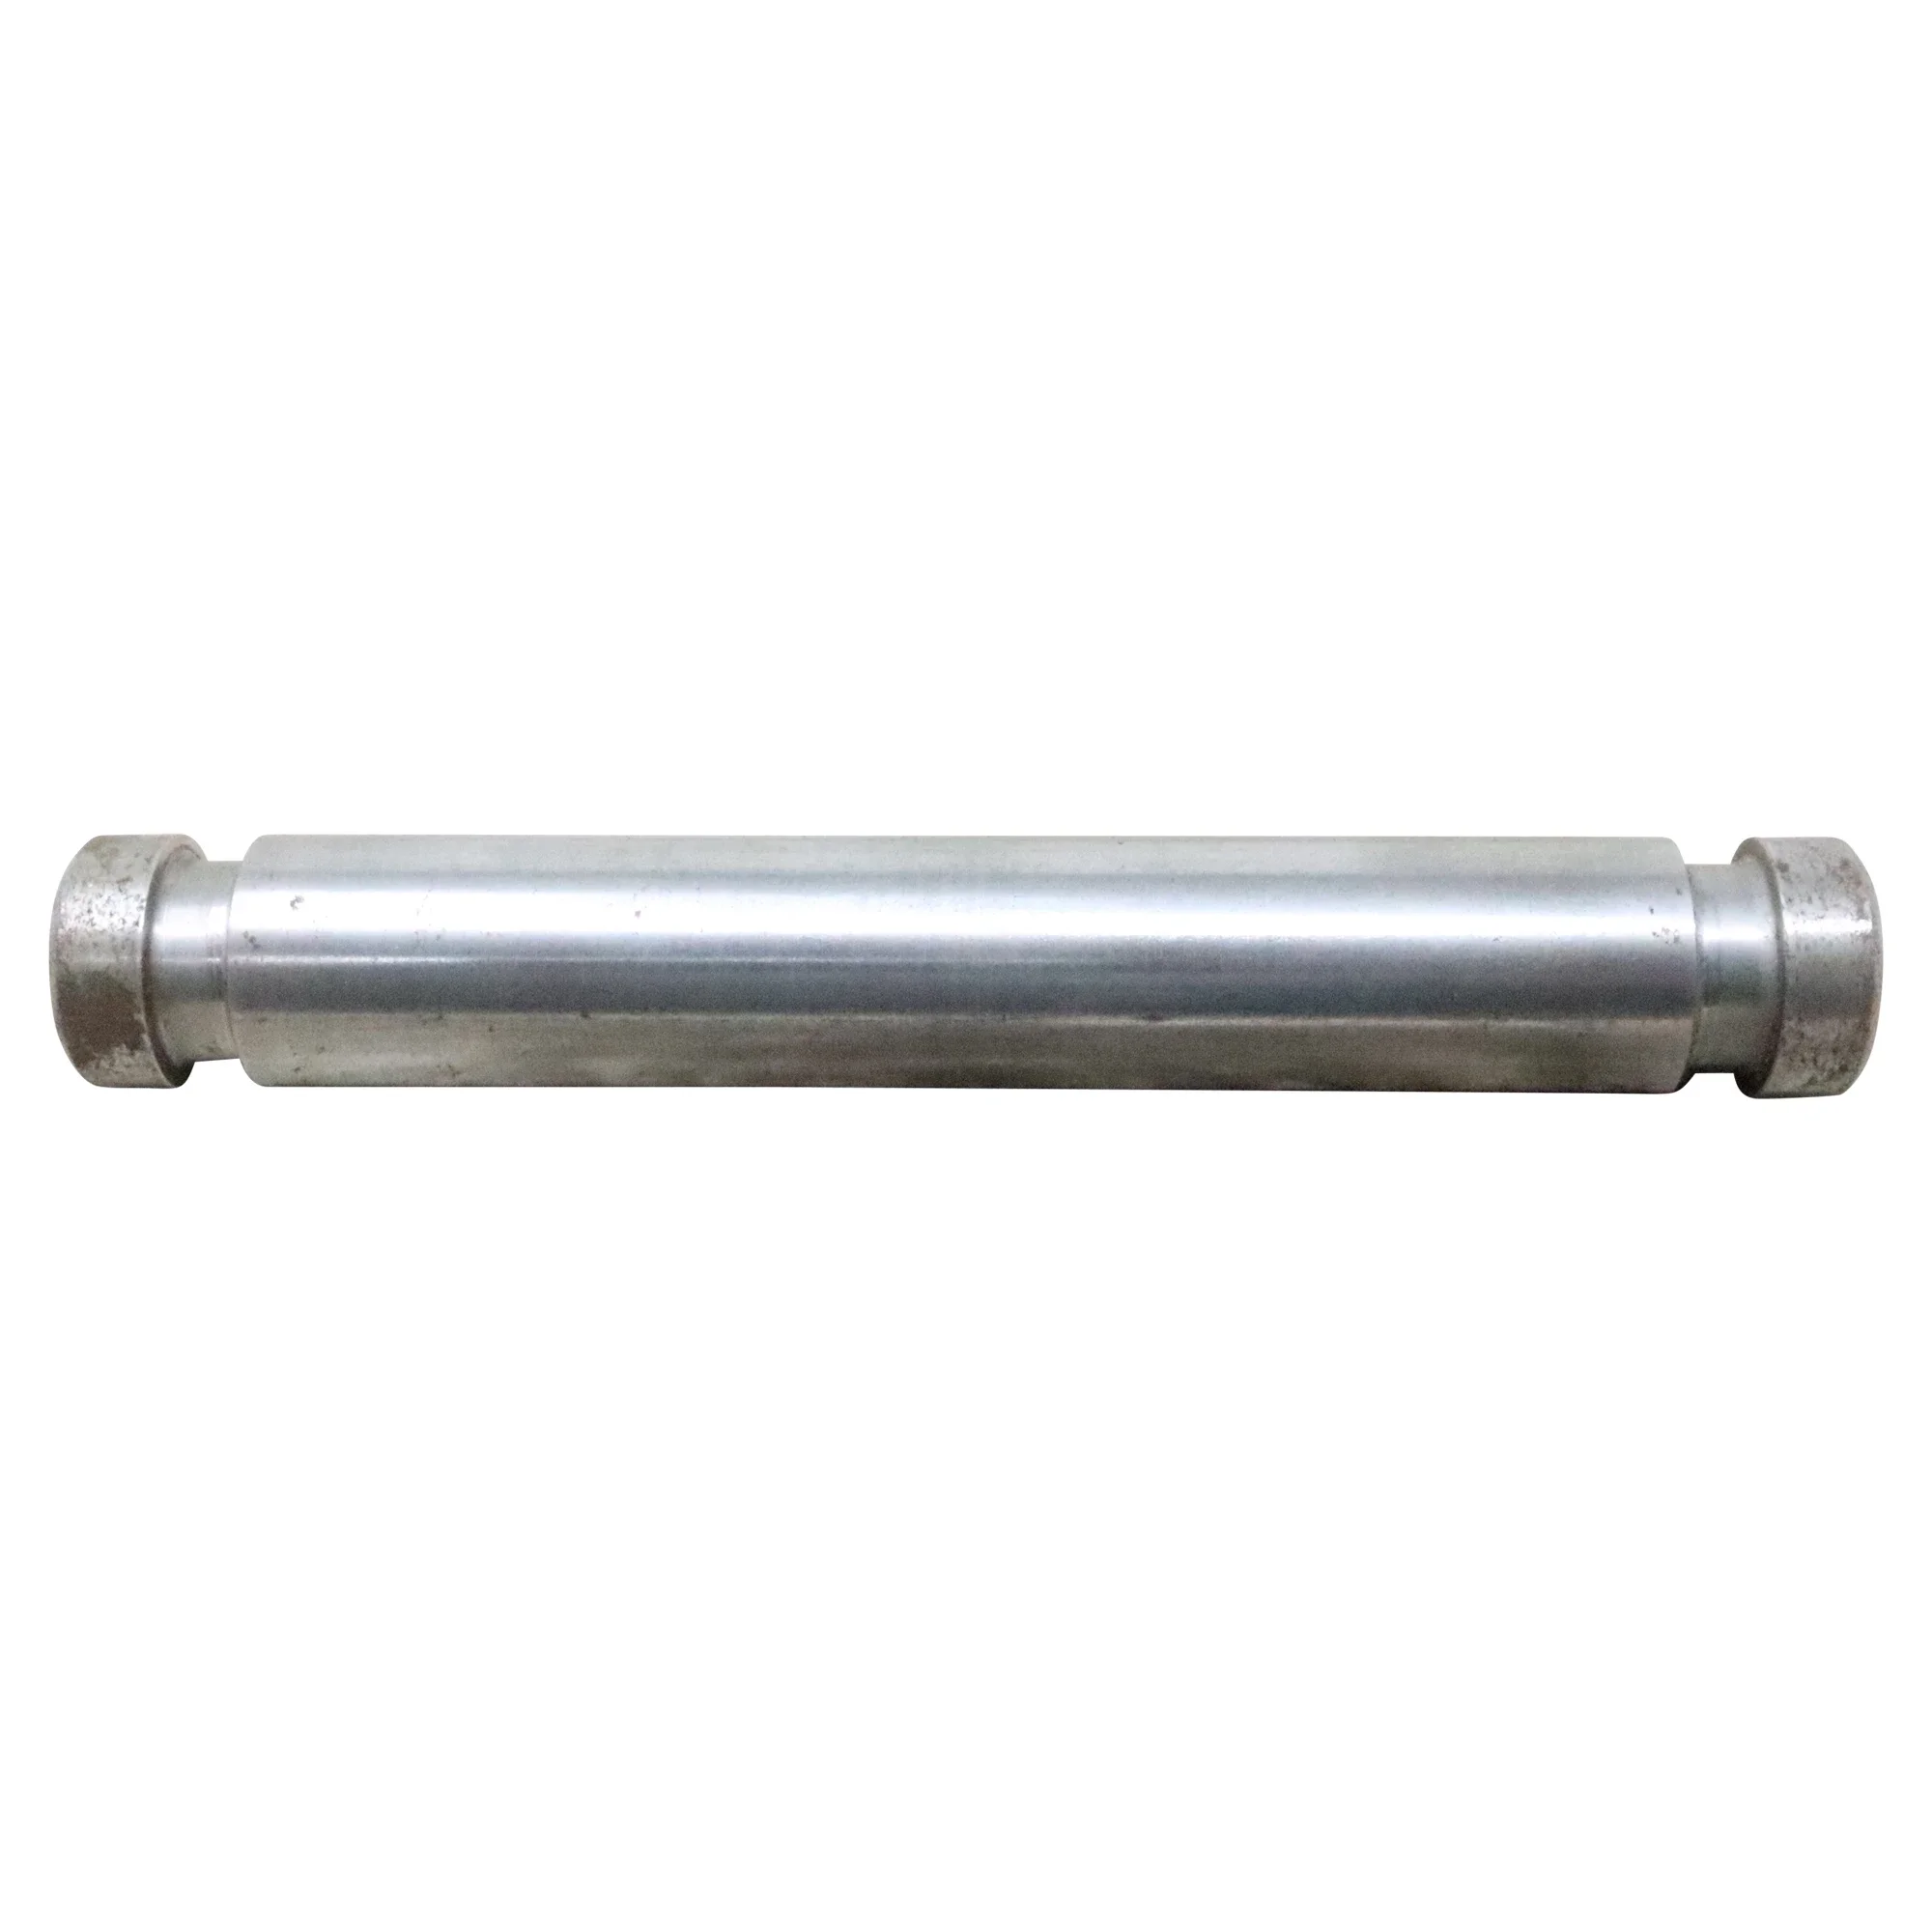 Wastebuilt® Replacement for McNeilus Pin Cylinder Side, Outer